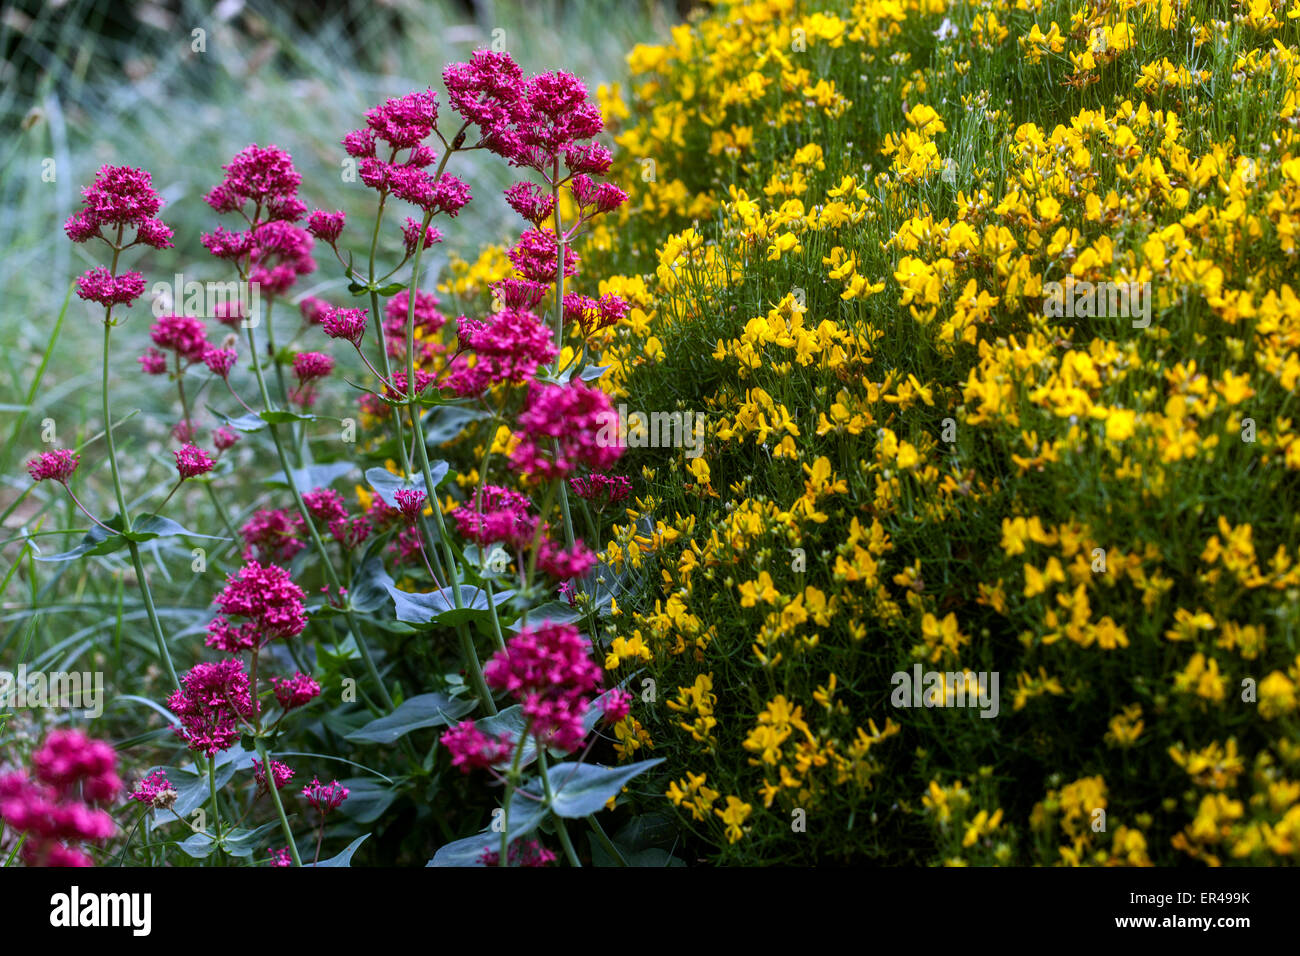 Red Centranthus ruber Coccineus Genista radiata Genista Garden Rayed Broom Star Broom Yellow Flowers Spring Tufted Flowering Prickly Compact Low Shrub Stock Photo